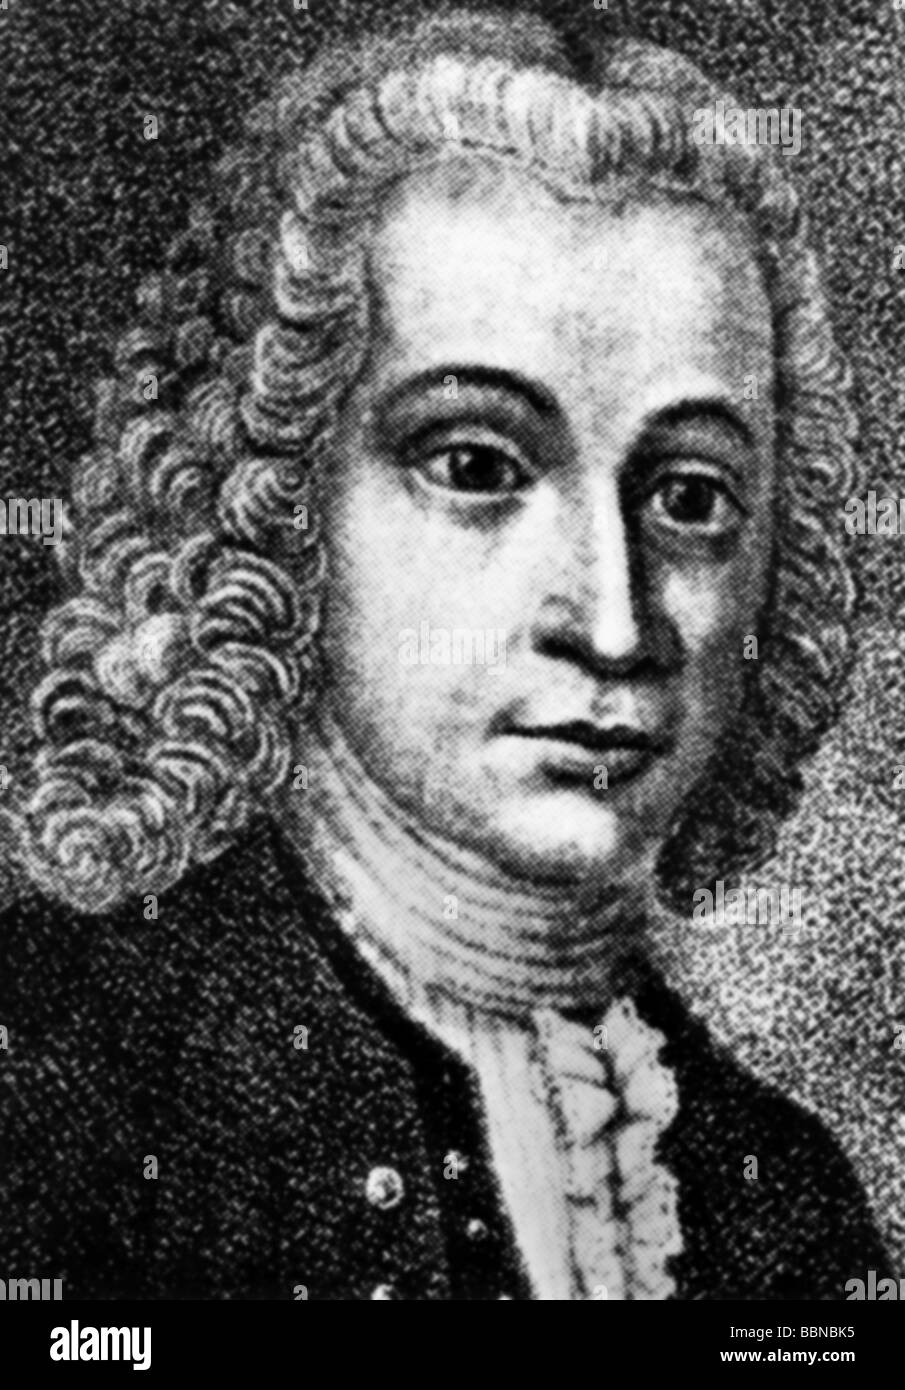 Celsius, Anders 27.11.1701 - 25.4.1744, Swedish astronomer, portrait, after contemporary image, 18th century, Stock Photo